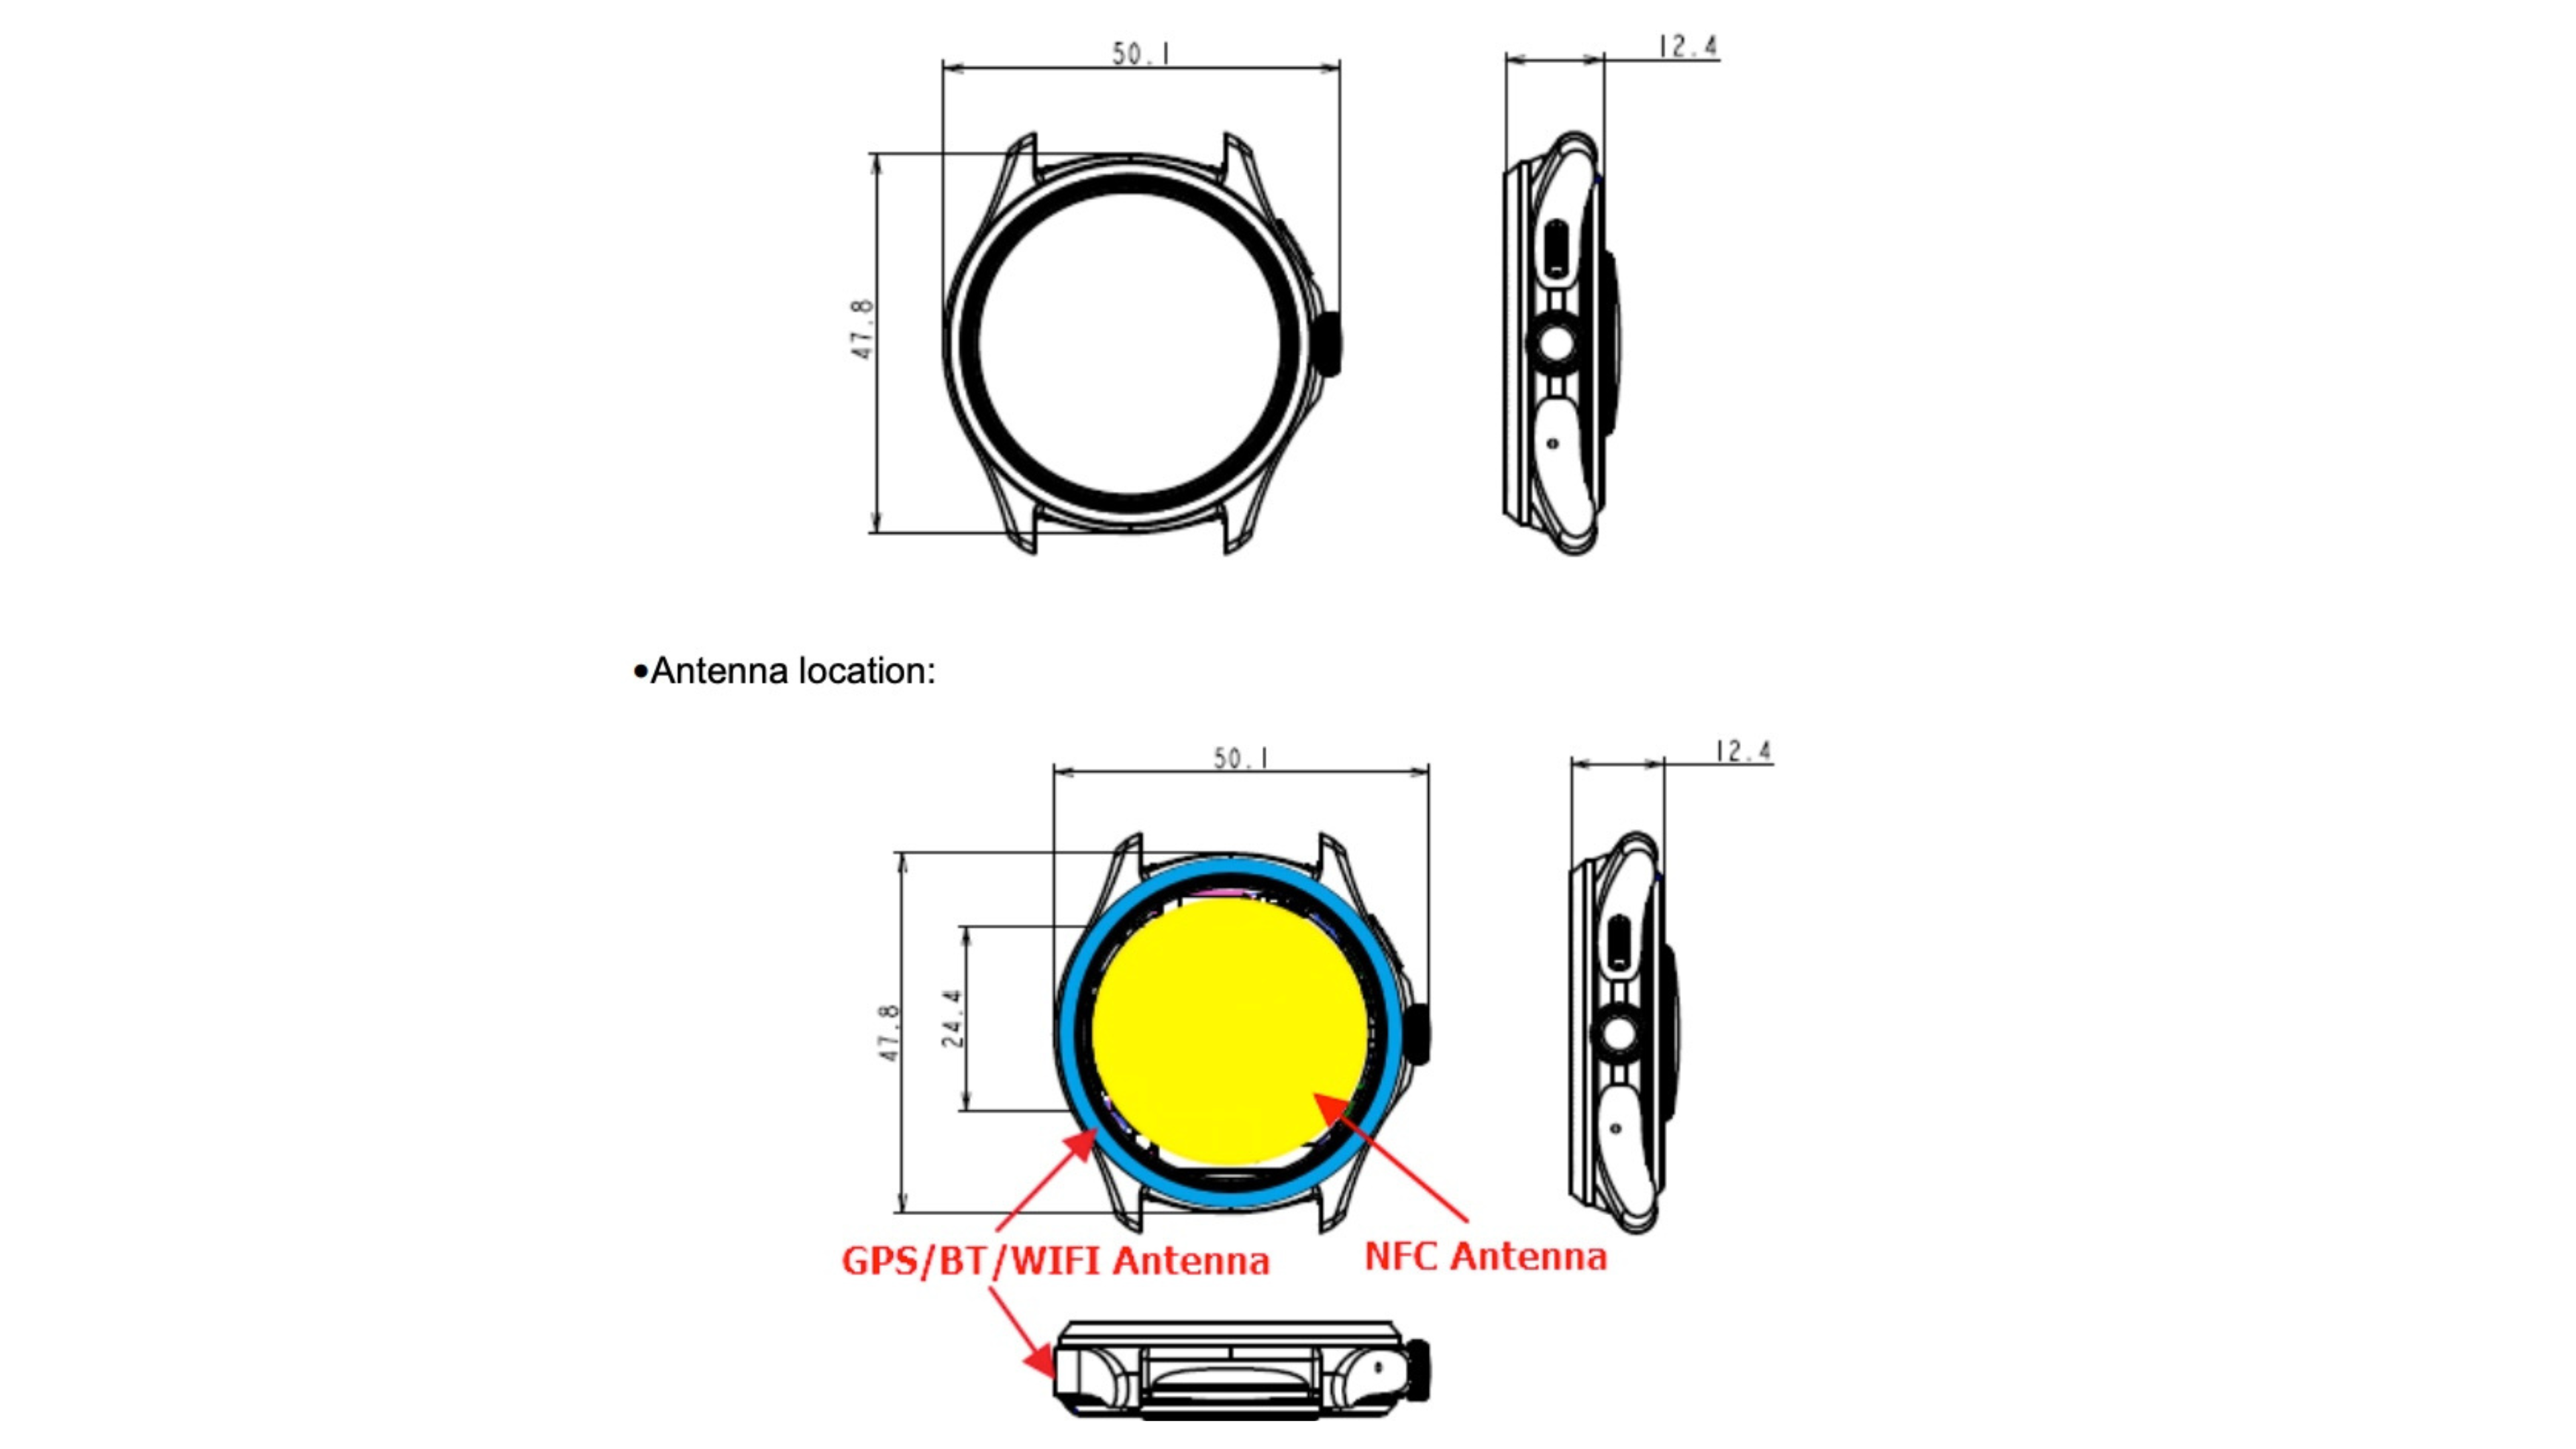 Mobvoi Watch dimensions from the FCC listing showing off the size coming in at 50.1mm